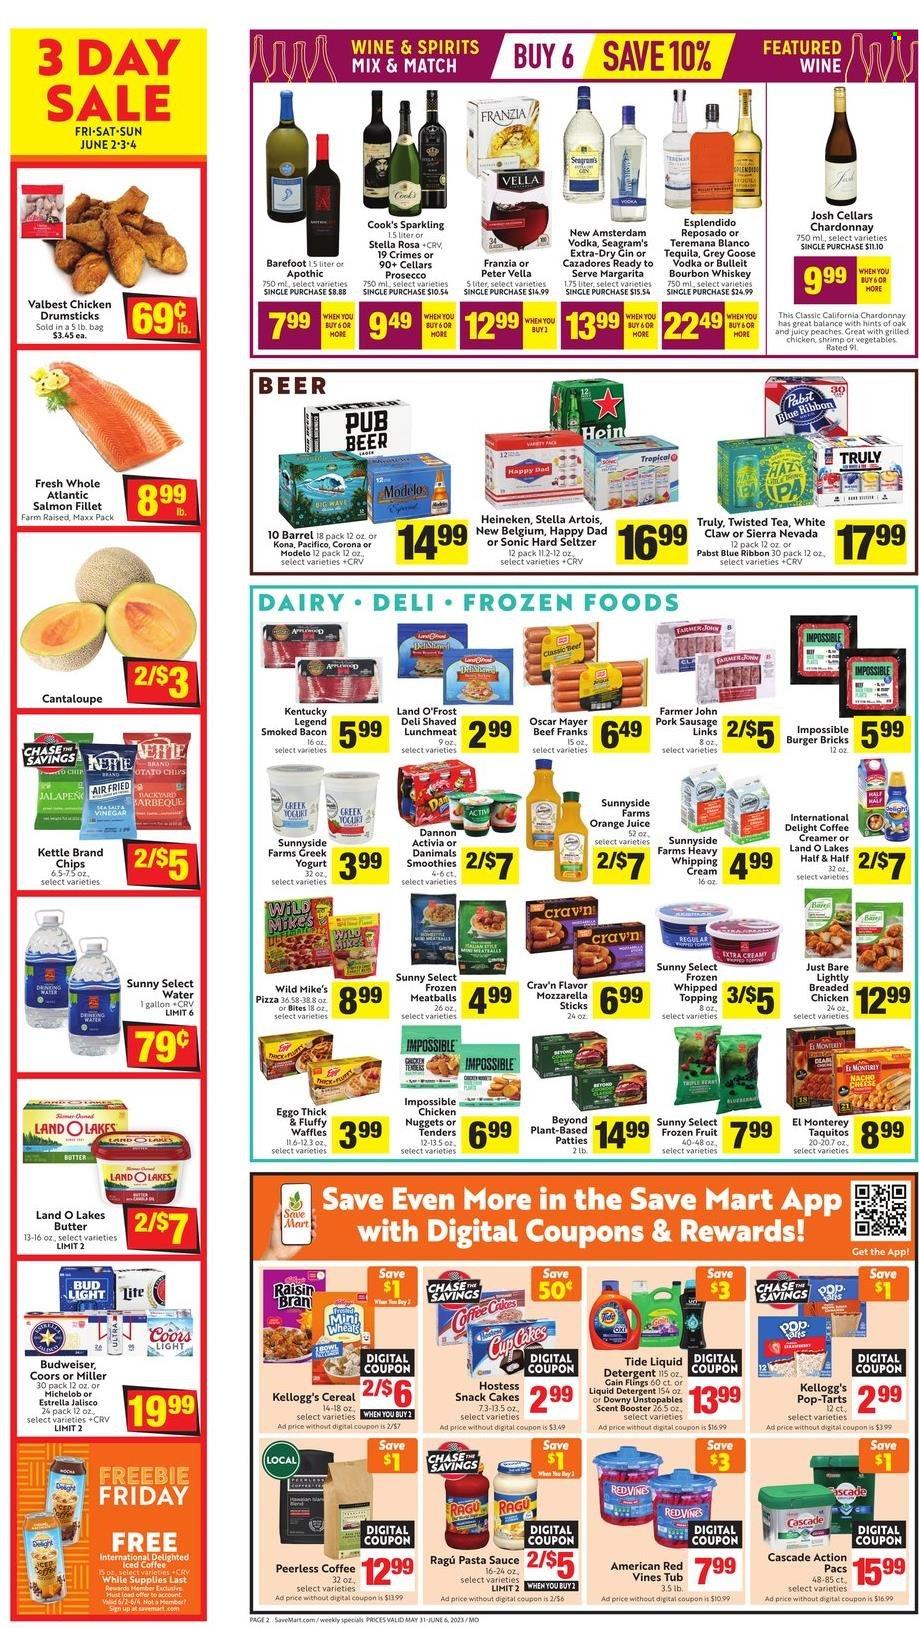 thumbnail - Save Mart Flyer - 05/31/2023 - 06/06/2023 - Sales products - cake, tart, cupcake, waffles, cantaloupe, peaches, chicken drumsticks, chicken, salmon fillet, shrimps, pizza, pasta sauce, meatballs, nuggets, sauce, fried chicken, chicken nuggets, taquitos, ragú pasta, bacon, Cook's, Oscar Mayer, pork sausage, frankfurters, lunch meat, cheese, greek yoghurt, yoghurt, Activia, Dannon, Danimals, butter, creamer, frozen fruit, Kellogg's, Pop-Tarts, Red Vines, topping, cereals, Raisin Bran, ragu, orange juice, juice, ice tea, smoothie, sparkling water, water, iced coffee, sparkling wine, white wine, prosecco, Chardonnay, wine, alcohol, gin, rum, tequila, vodka, whiskey, White Claw, Hard Seltzer, TRULY, bourbon whiskey, whisky, beer, Stella Artois, Bud Light, Corona Extra, Heineken, Modelo, Pabst Blue Ribbon, Estrella, Pabst, Cascade, Gain, Tide, liquid detergent, Budweiser, Half and half, Coors, Twisted Tea, Michelob. Page 2.